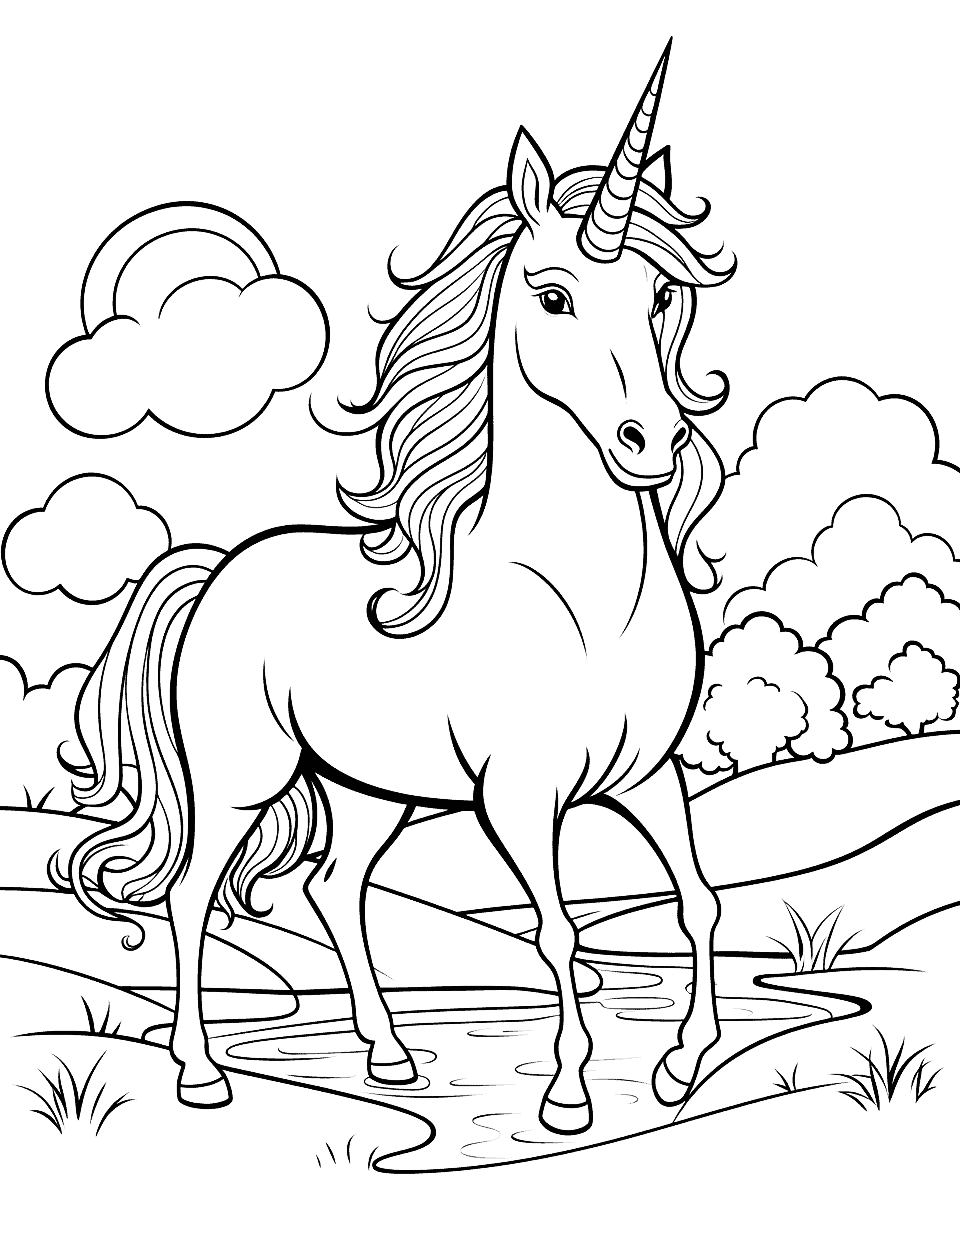 Beautiful Unicorn by the River Coloring Page - A beautiful unicorn by a pristine river, with an intricate landscape surrounding it.